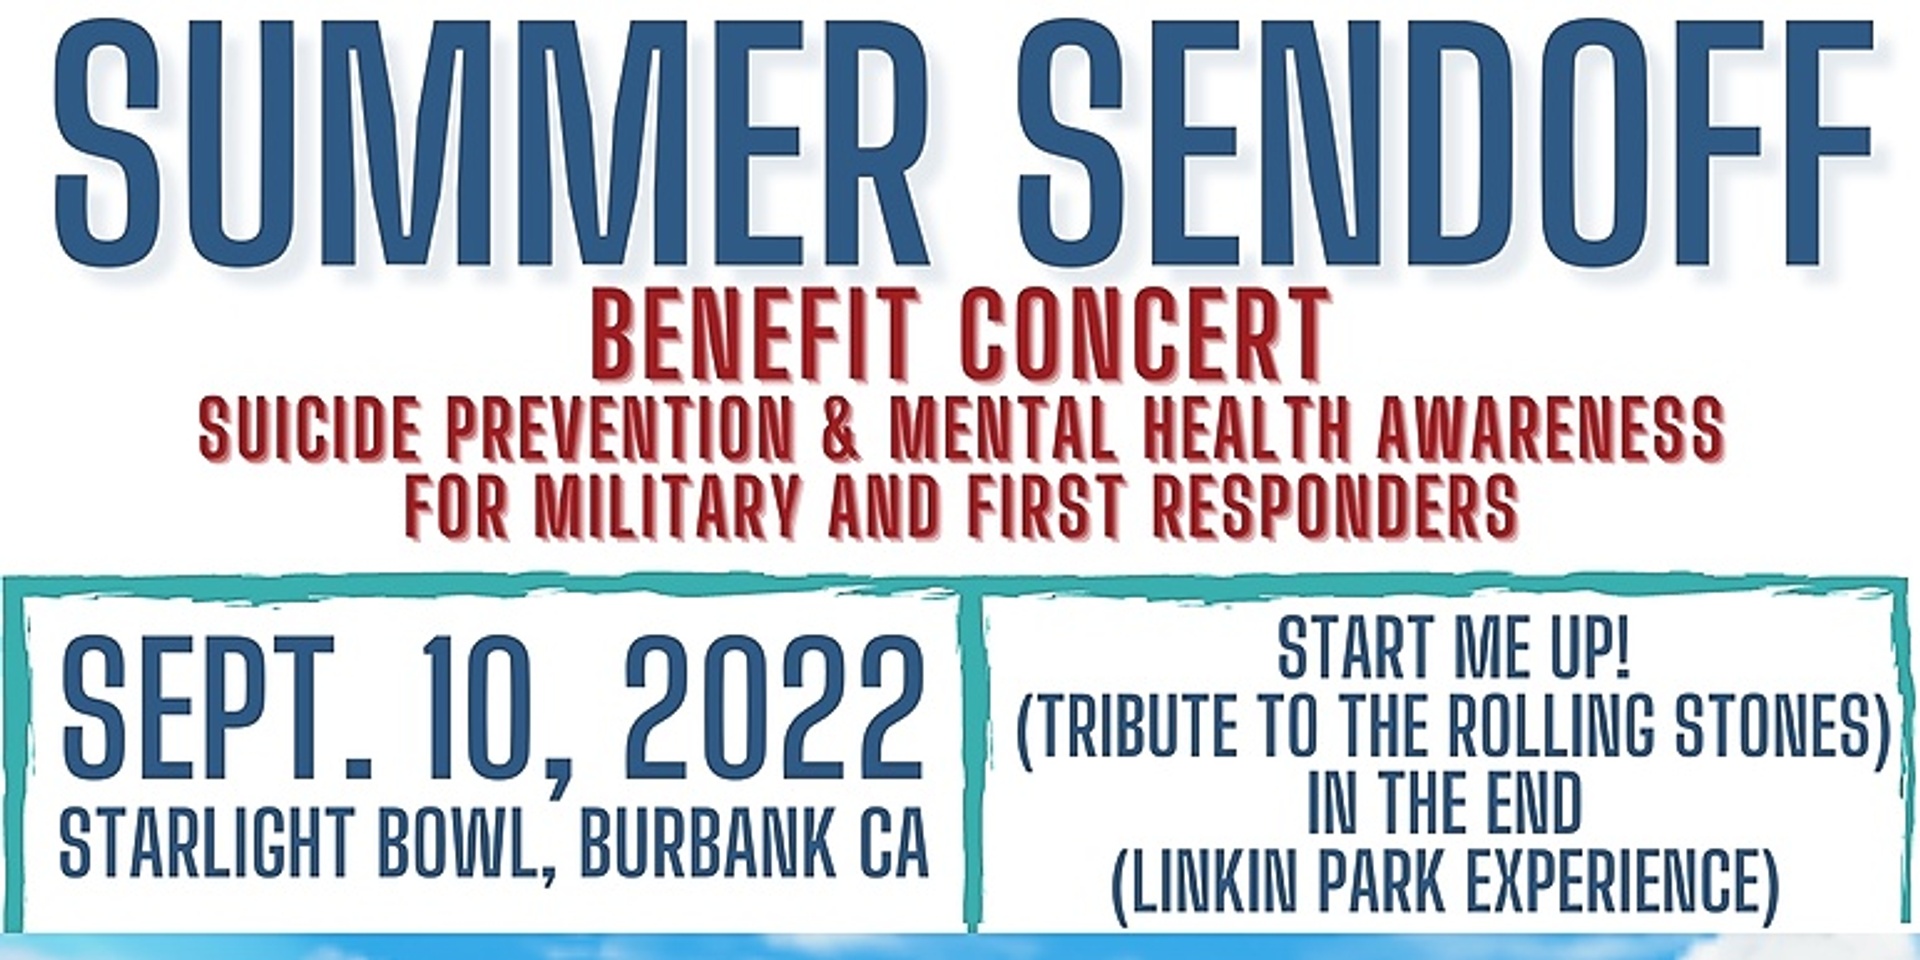 Summer Sendoff - Benefit Concert for Suicide Prevention Awareness for Military and First Responders (feat. In The End - A Linkin Park Experience AND Start Me Up! - A Tribute to the Rolling Stones)